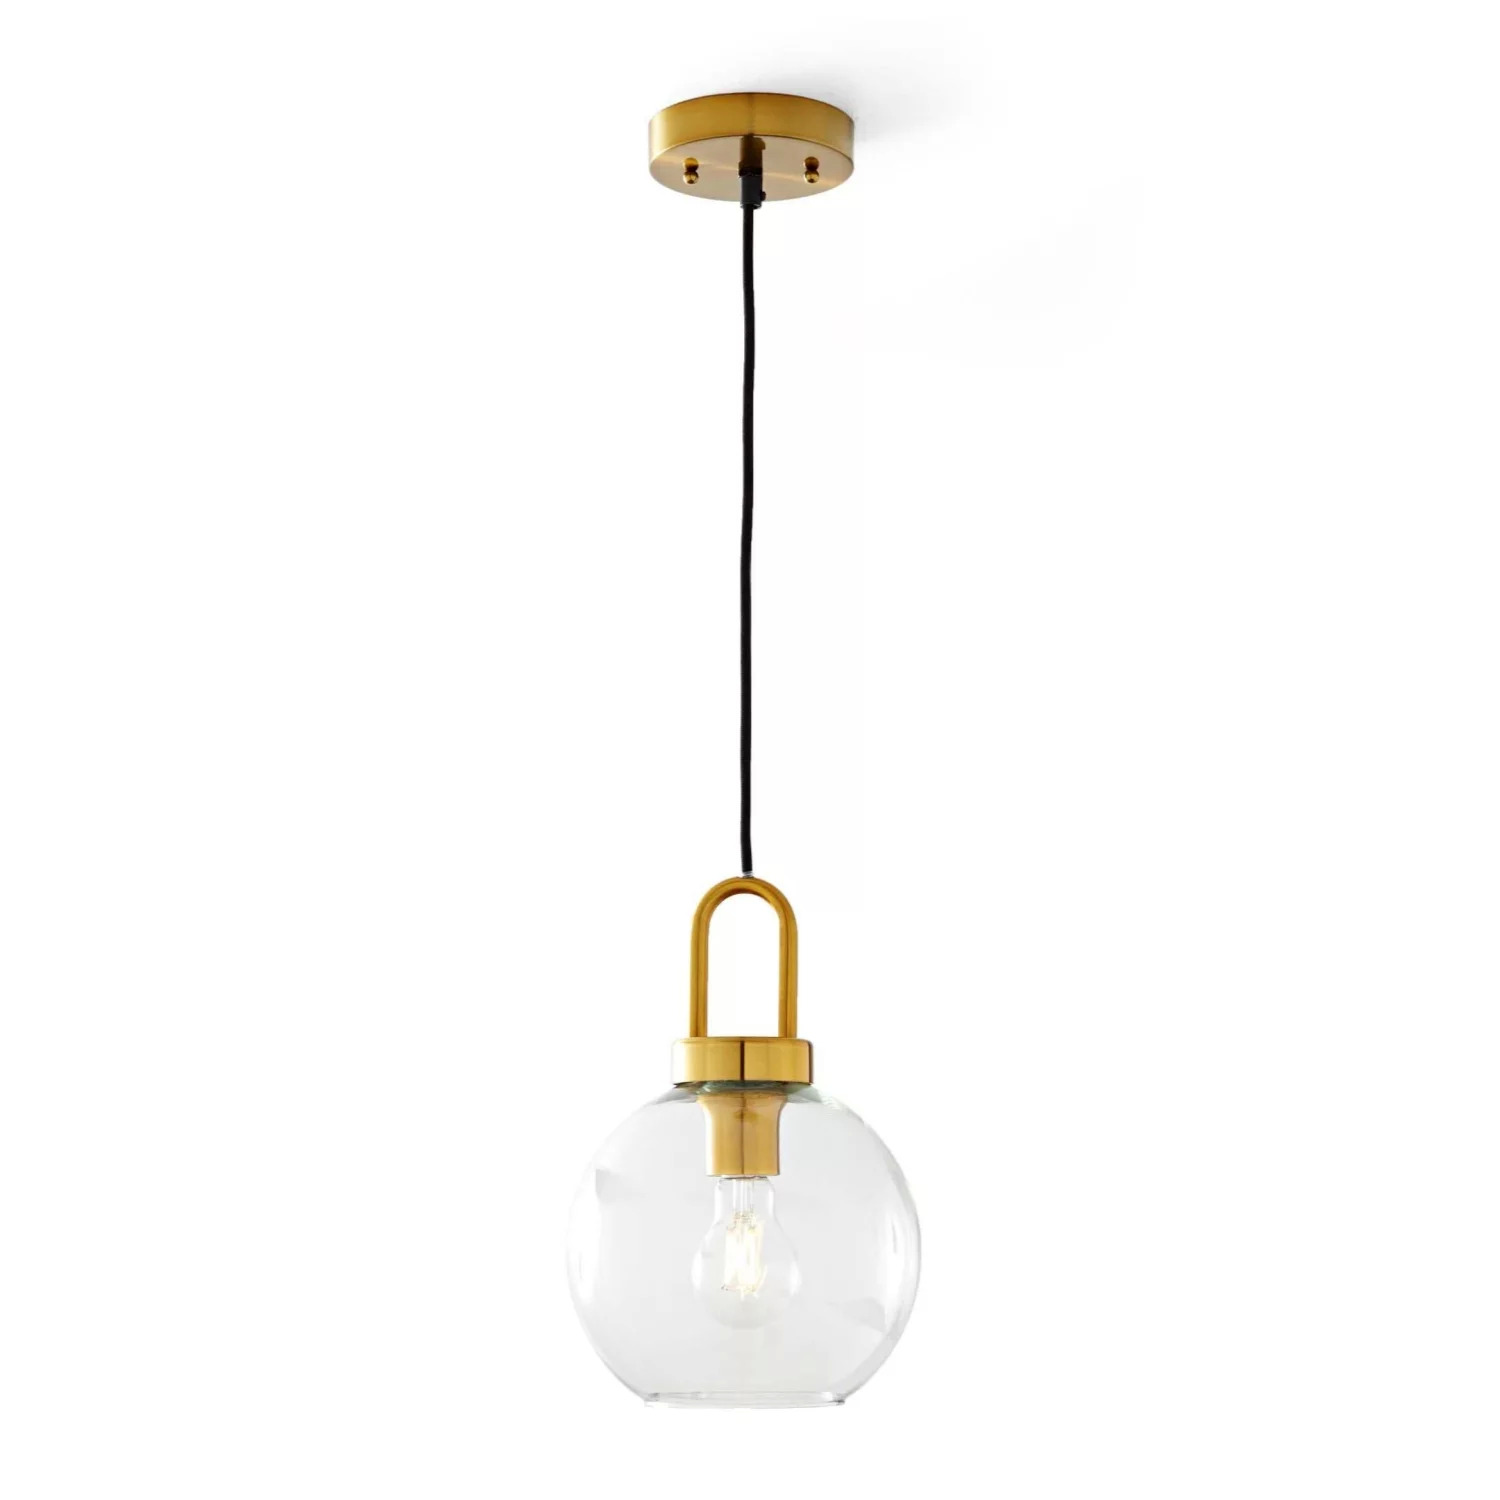 59” Gold/Black/Silver Pendant Ceiling Light  Metal Base Glass Shade  LED Bulb Included $22.98